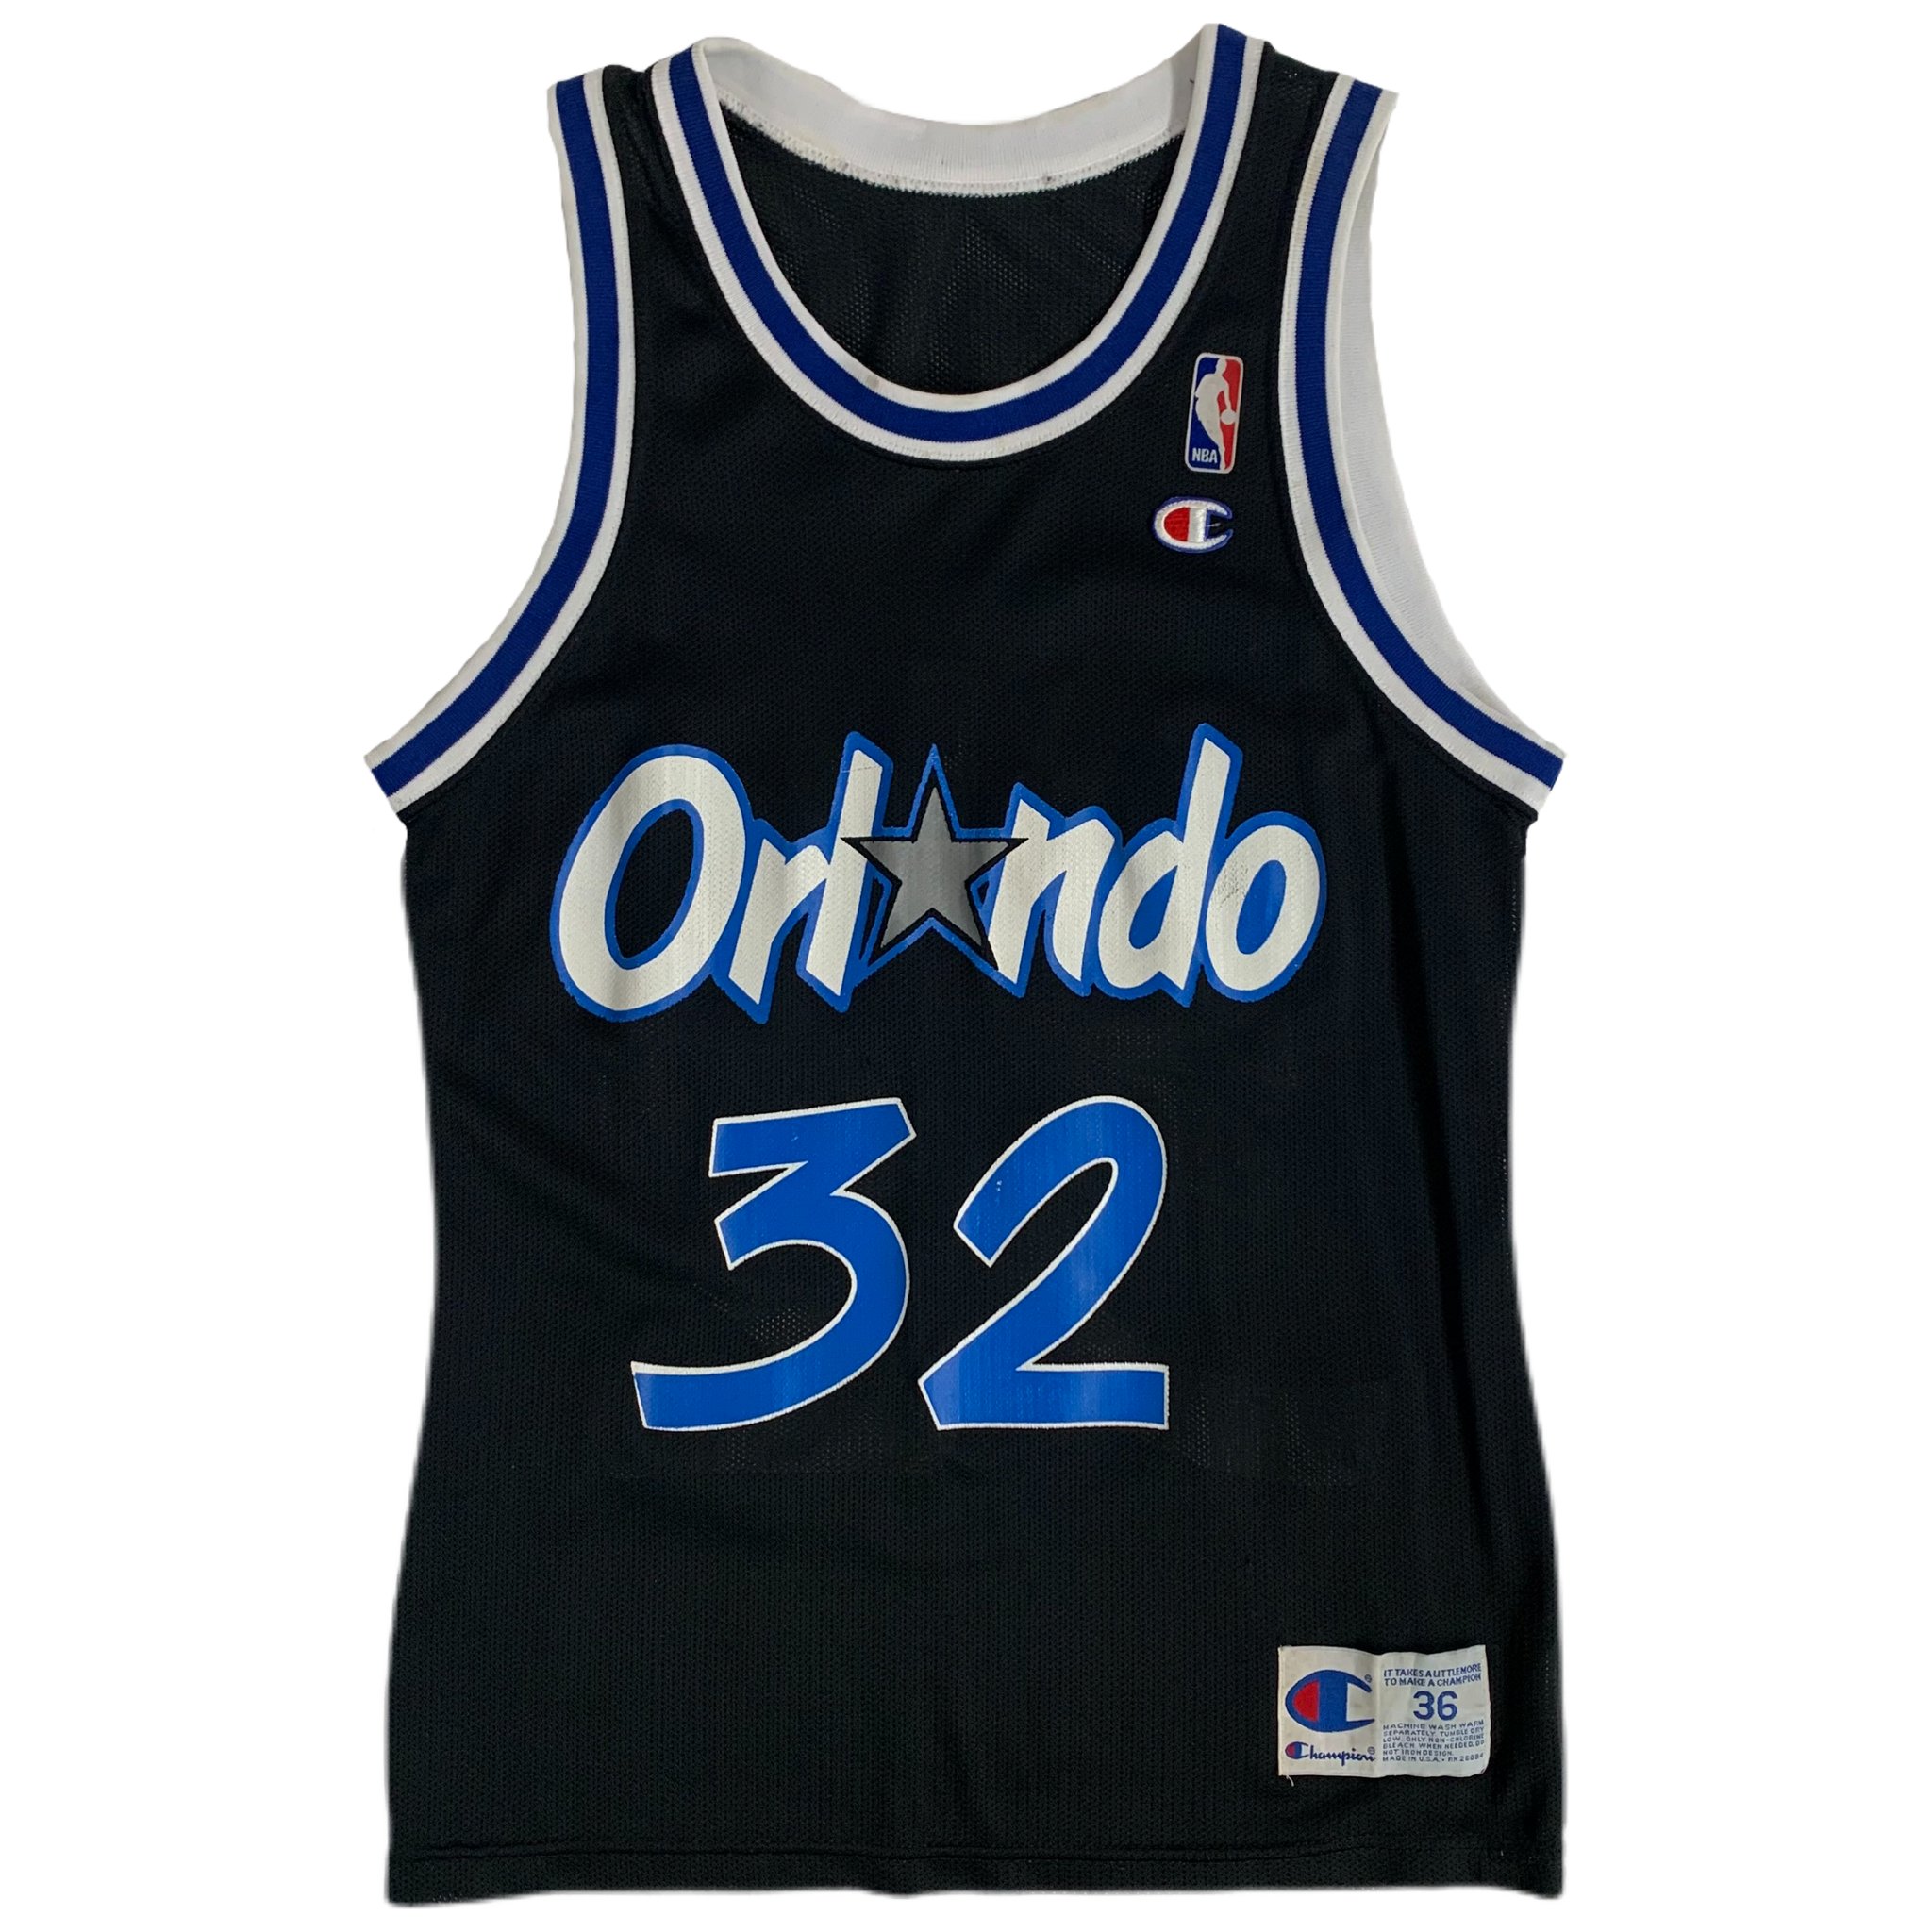 Vintage Shaquille O'Neal Authentic Orlando Magic Champion Jersey